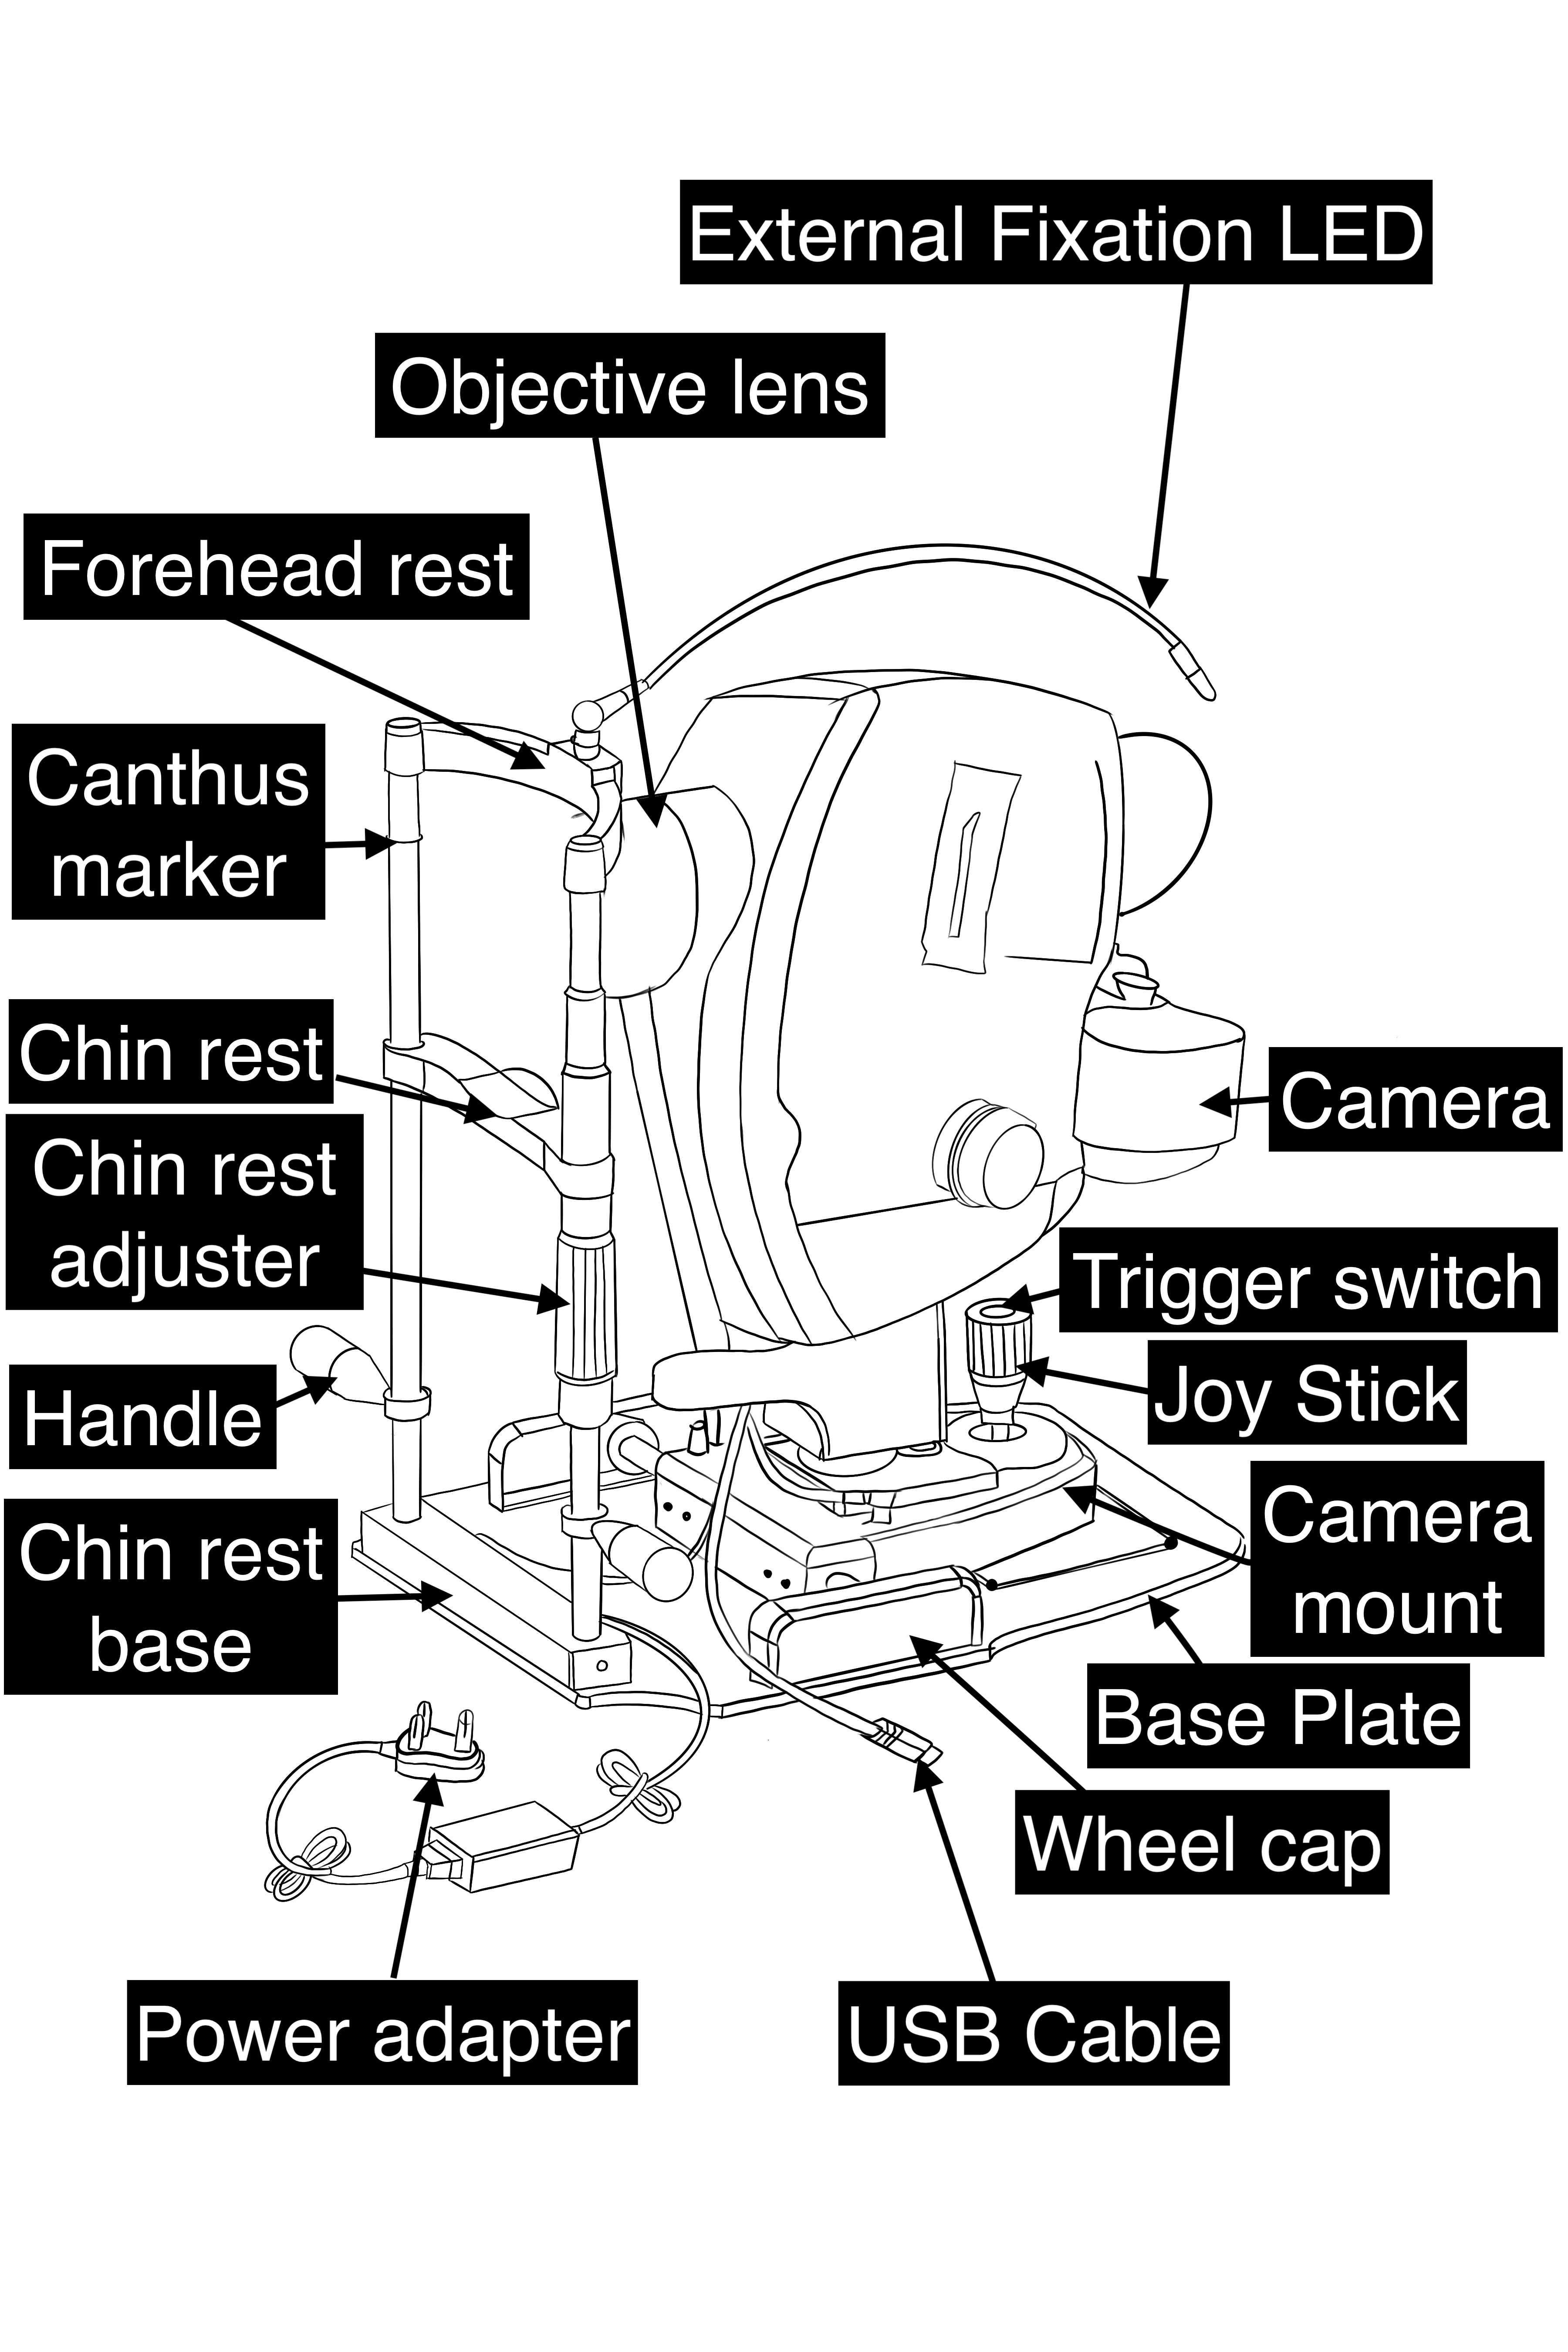 Parts of a fundus camera are shown in a schematic diagram of a typical fundus camera